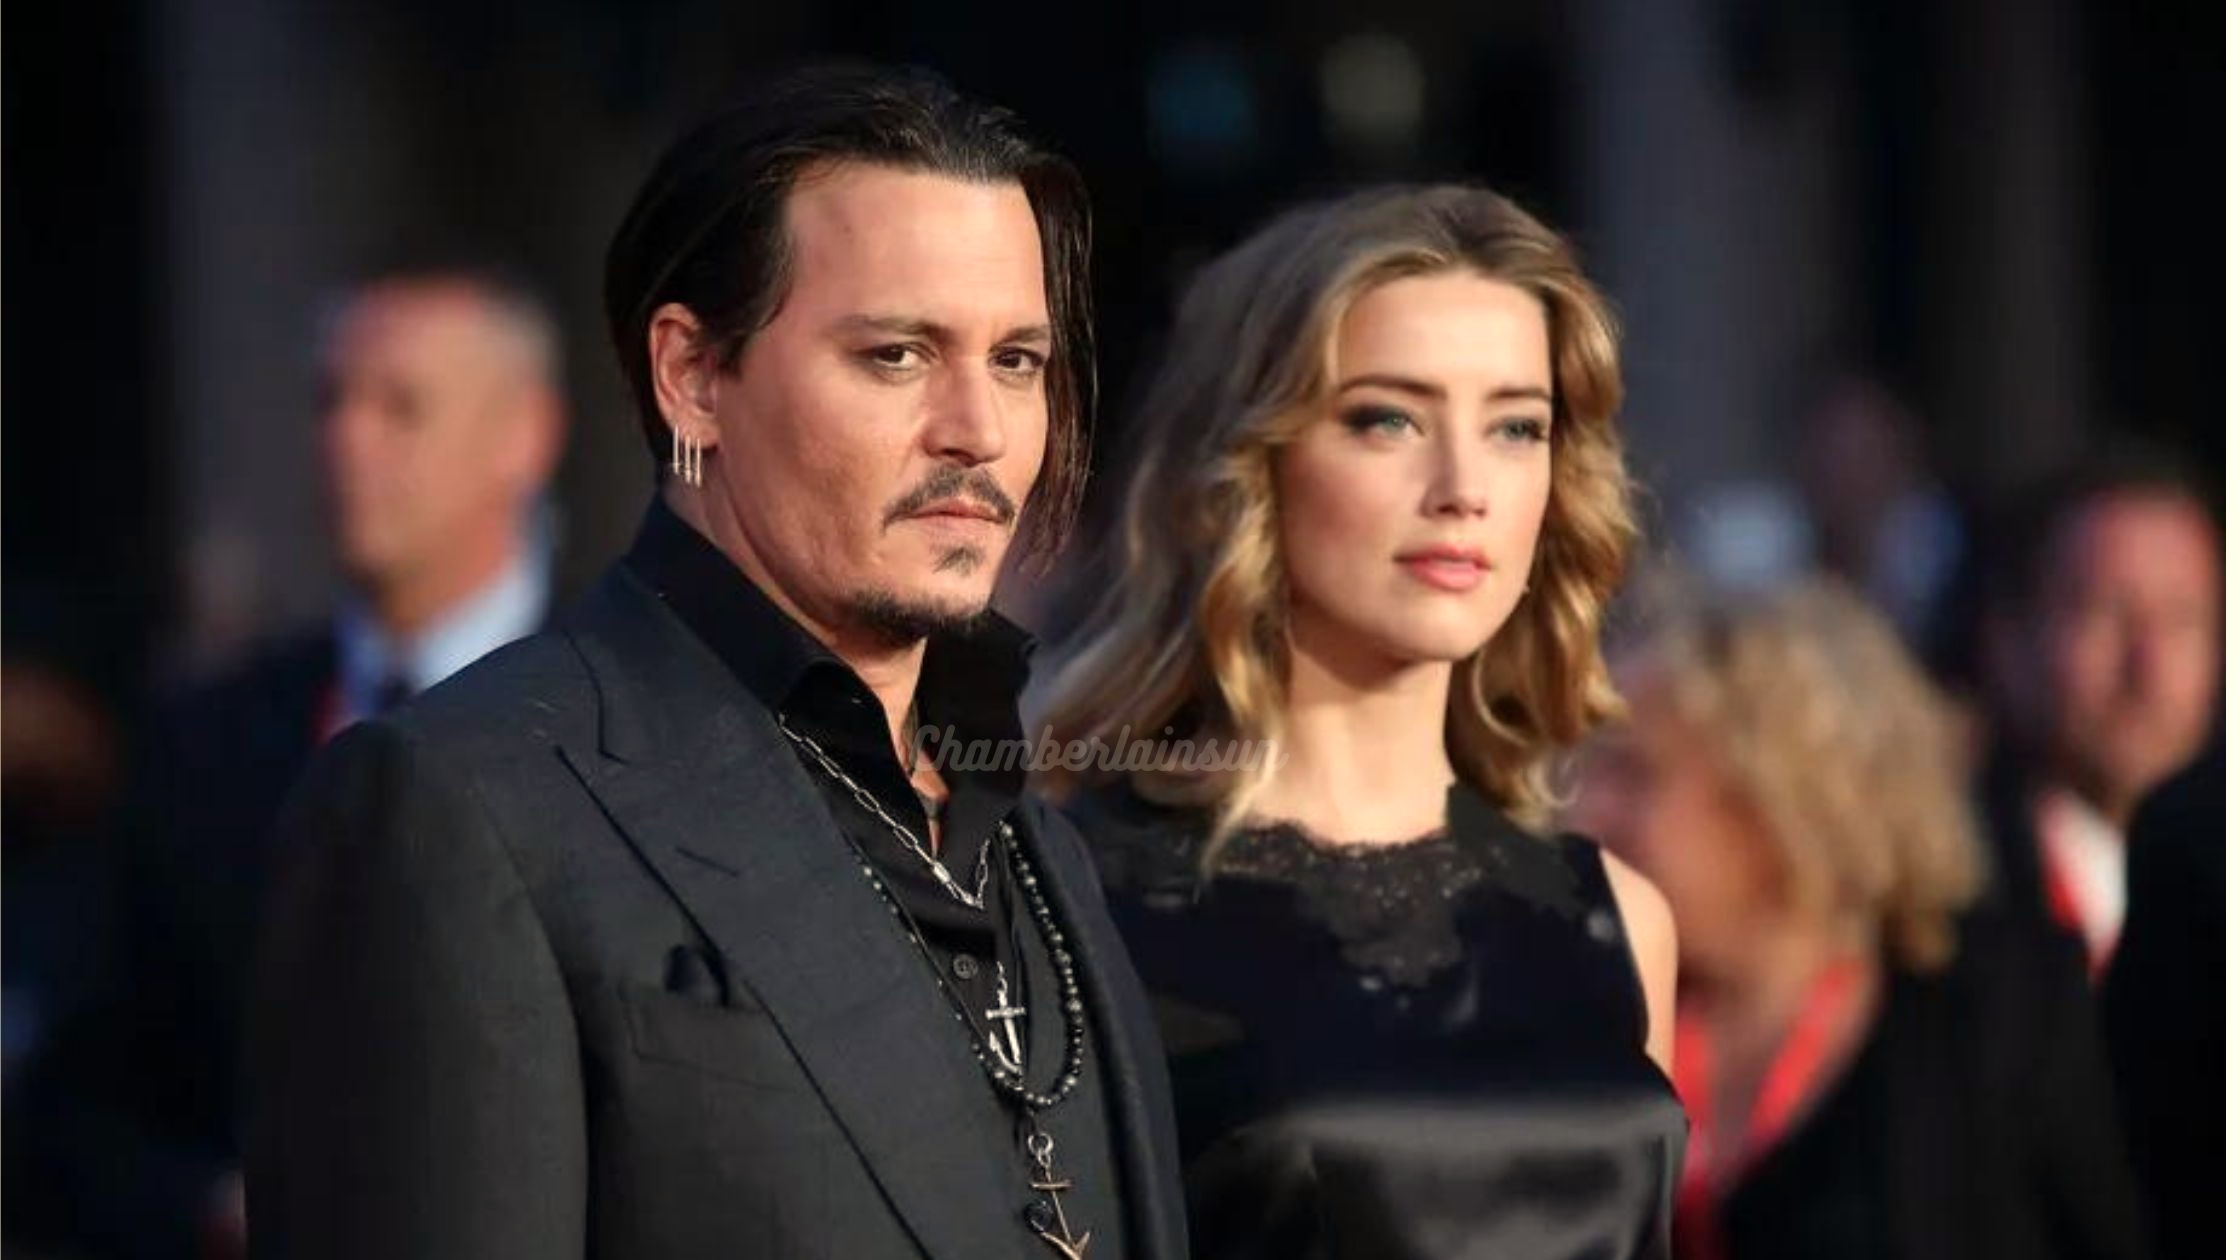 Do You Know How Much Does Amber Heard Have To Pay, Jhonny Depp